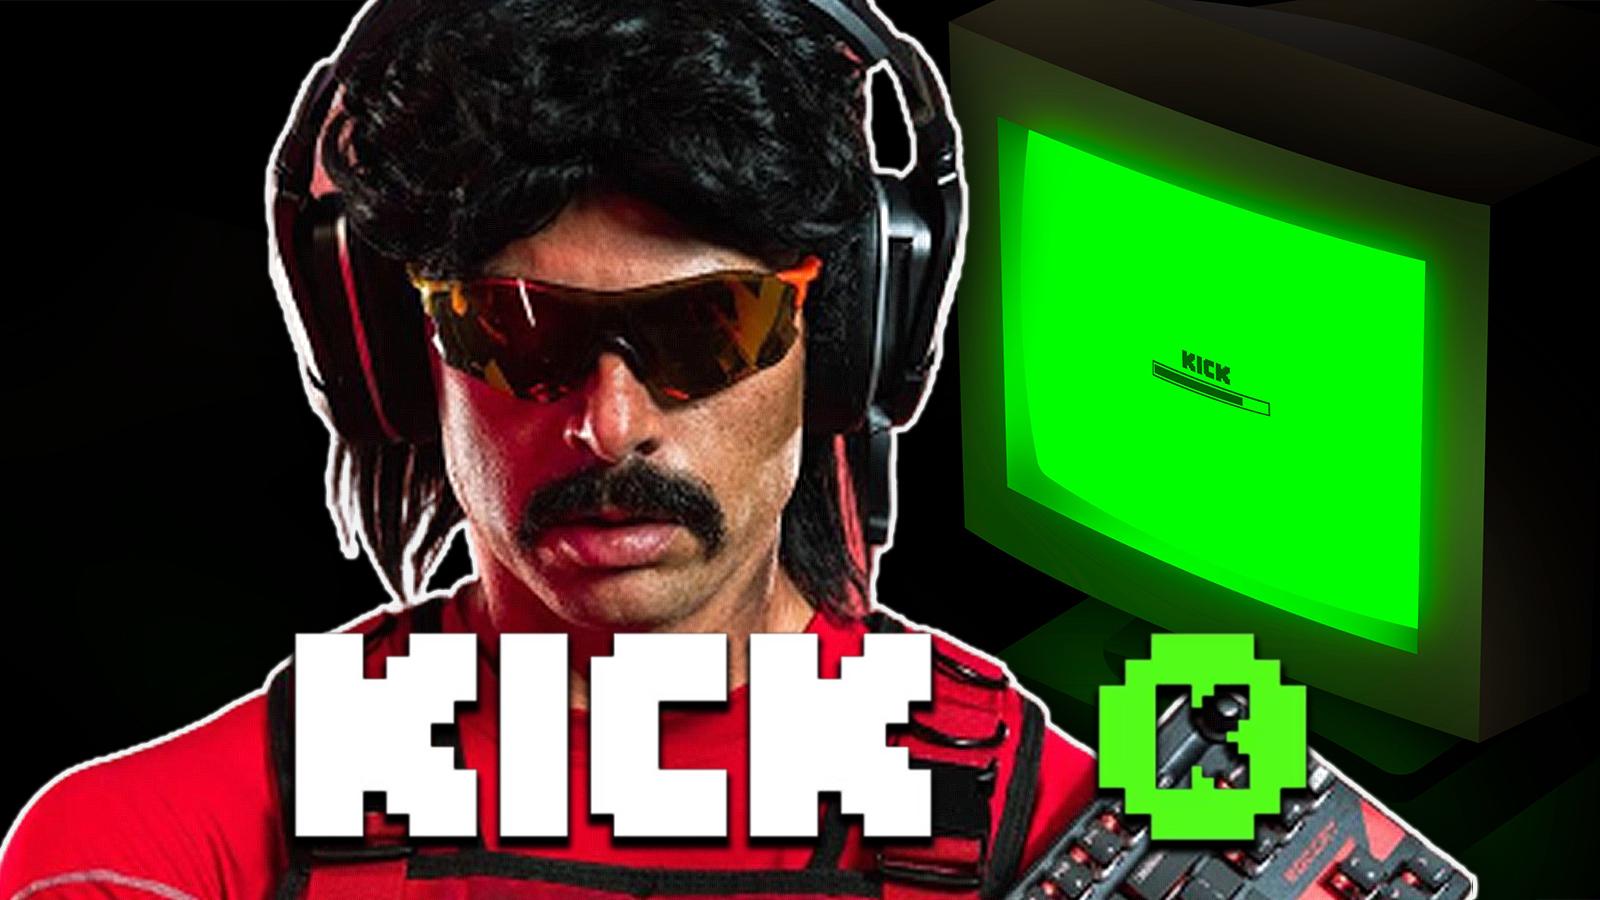 dr disrespect responds to fans asking if he'll join kick